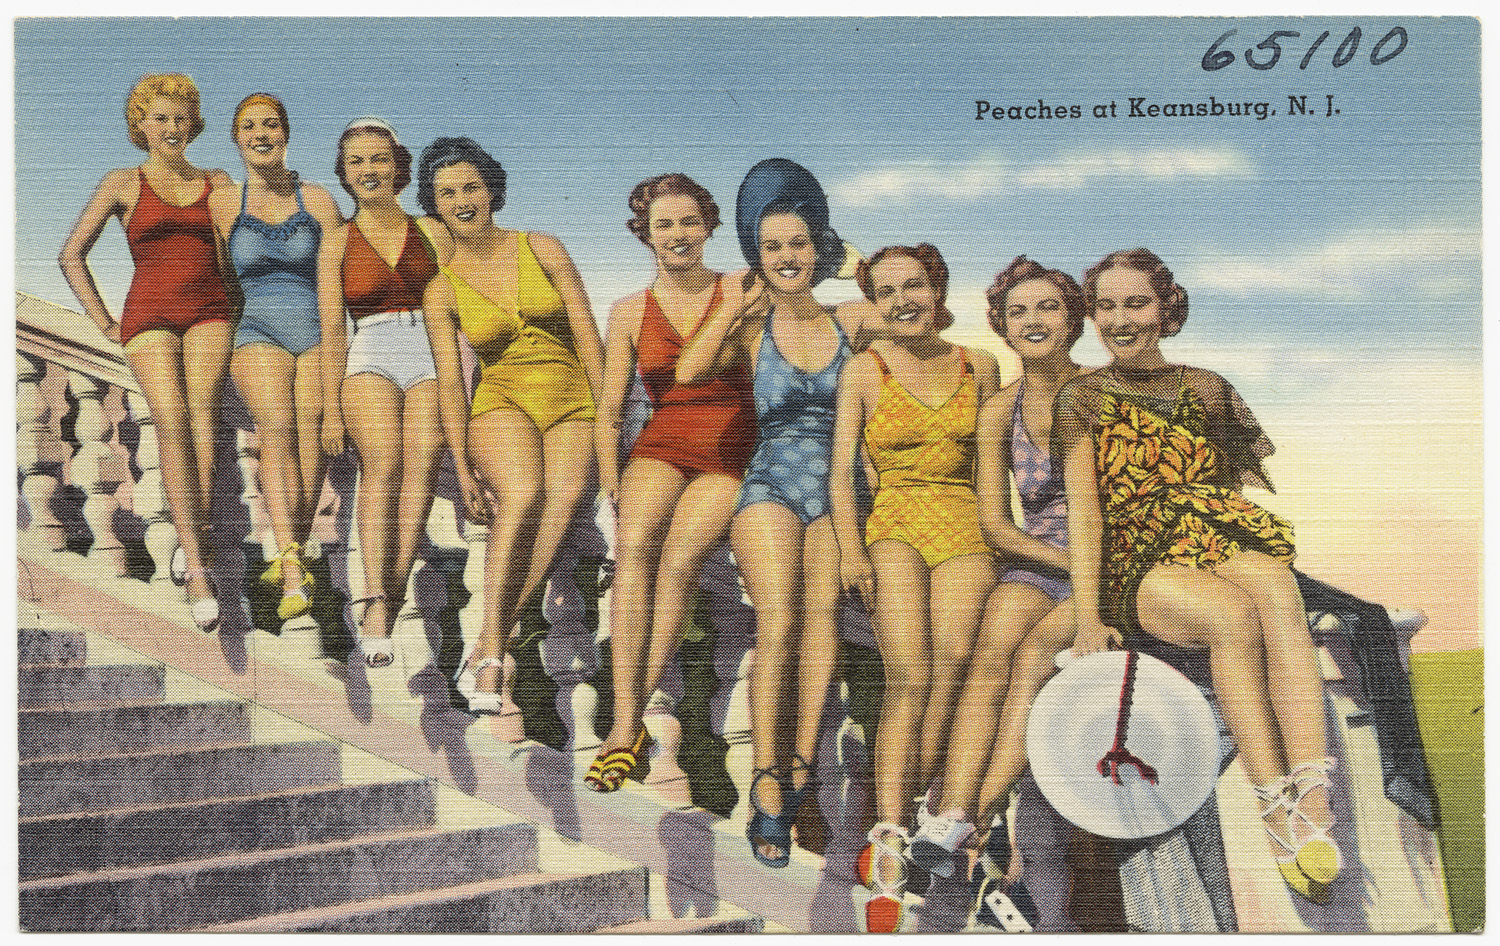 an image of a group of women that are in bathing suits